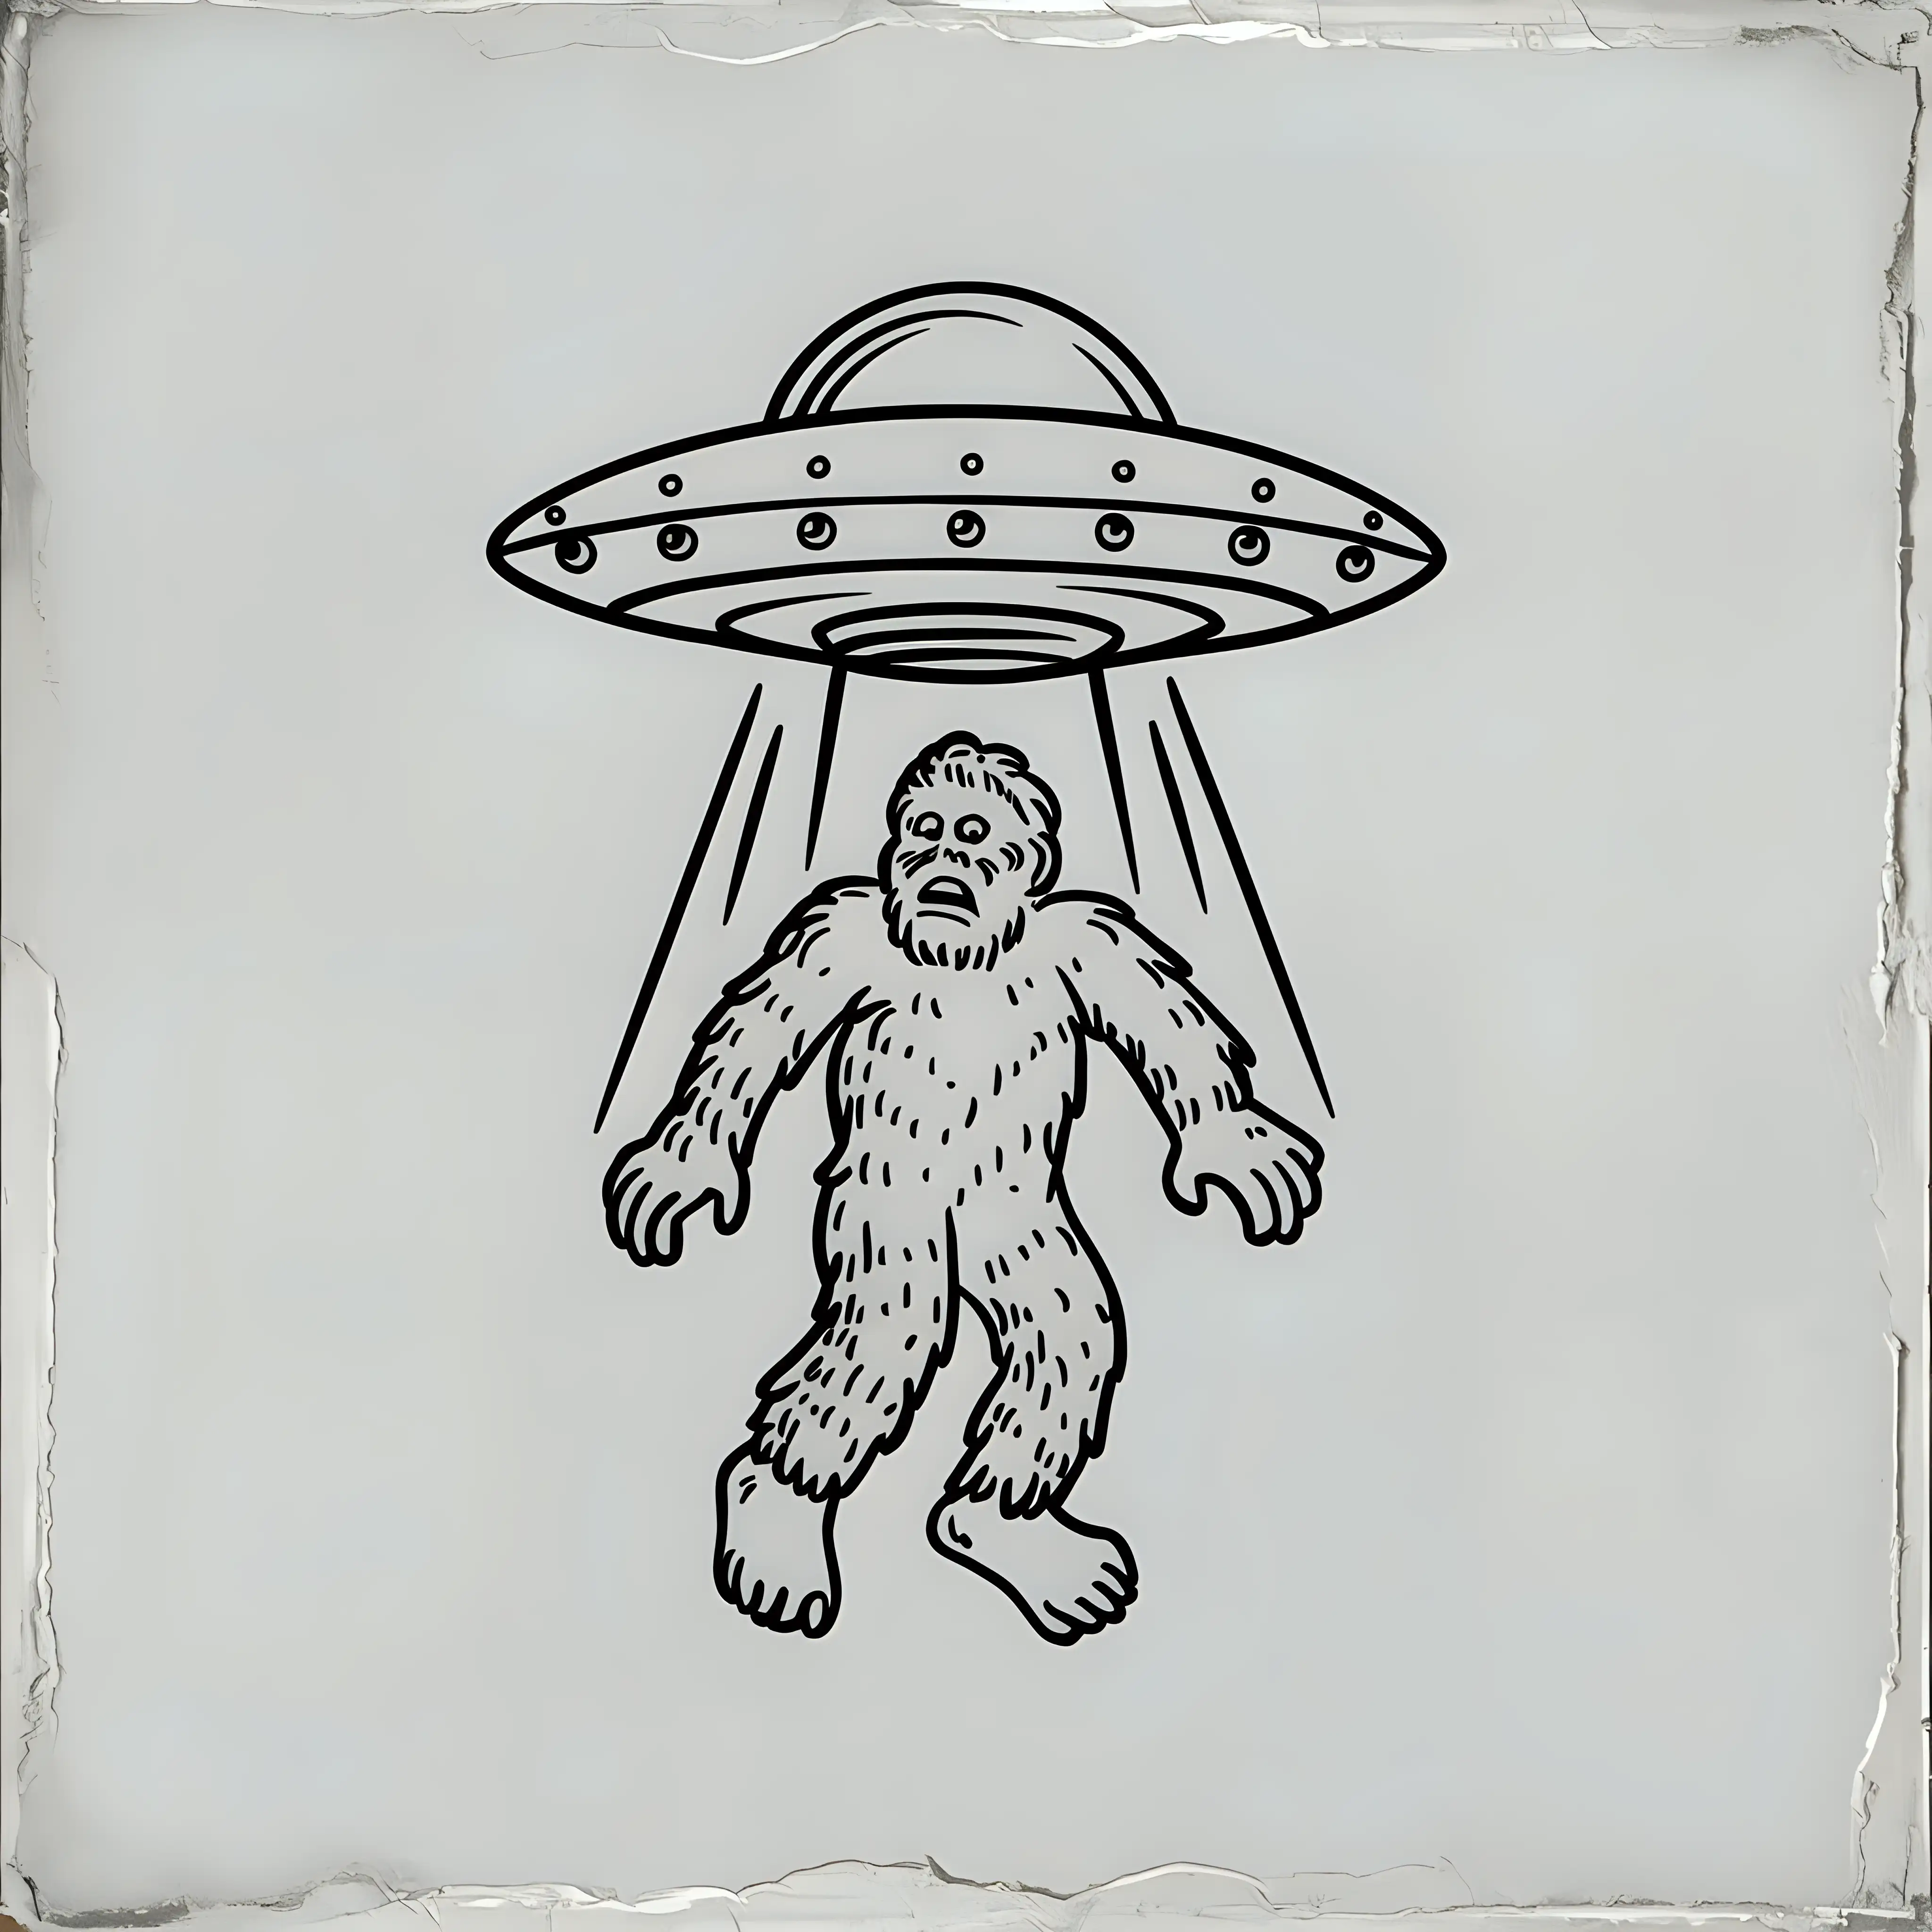 big foot inducted by ufo plate on fine line simple art vintage on white background